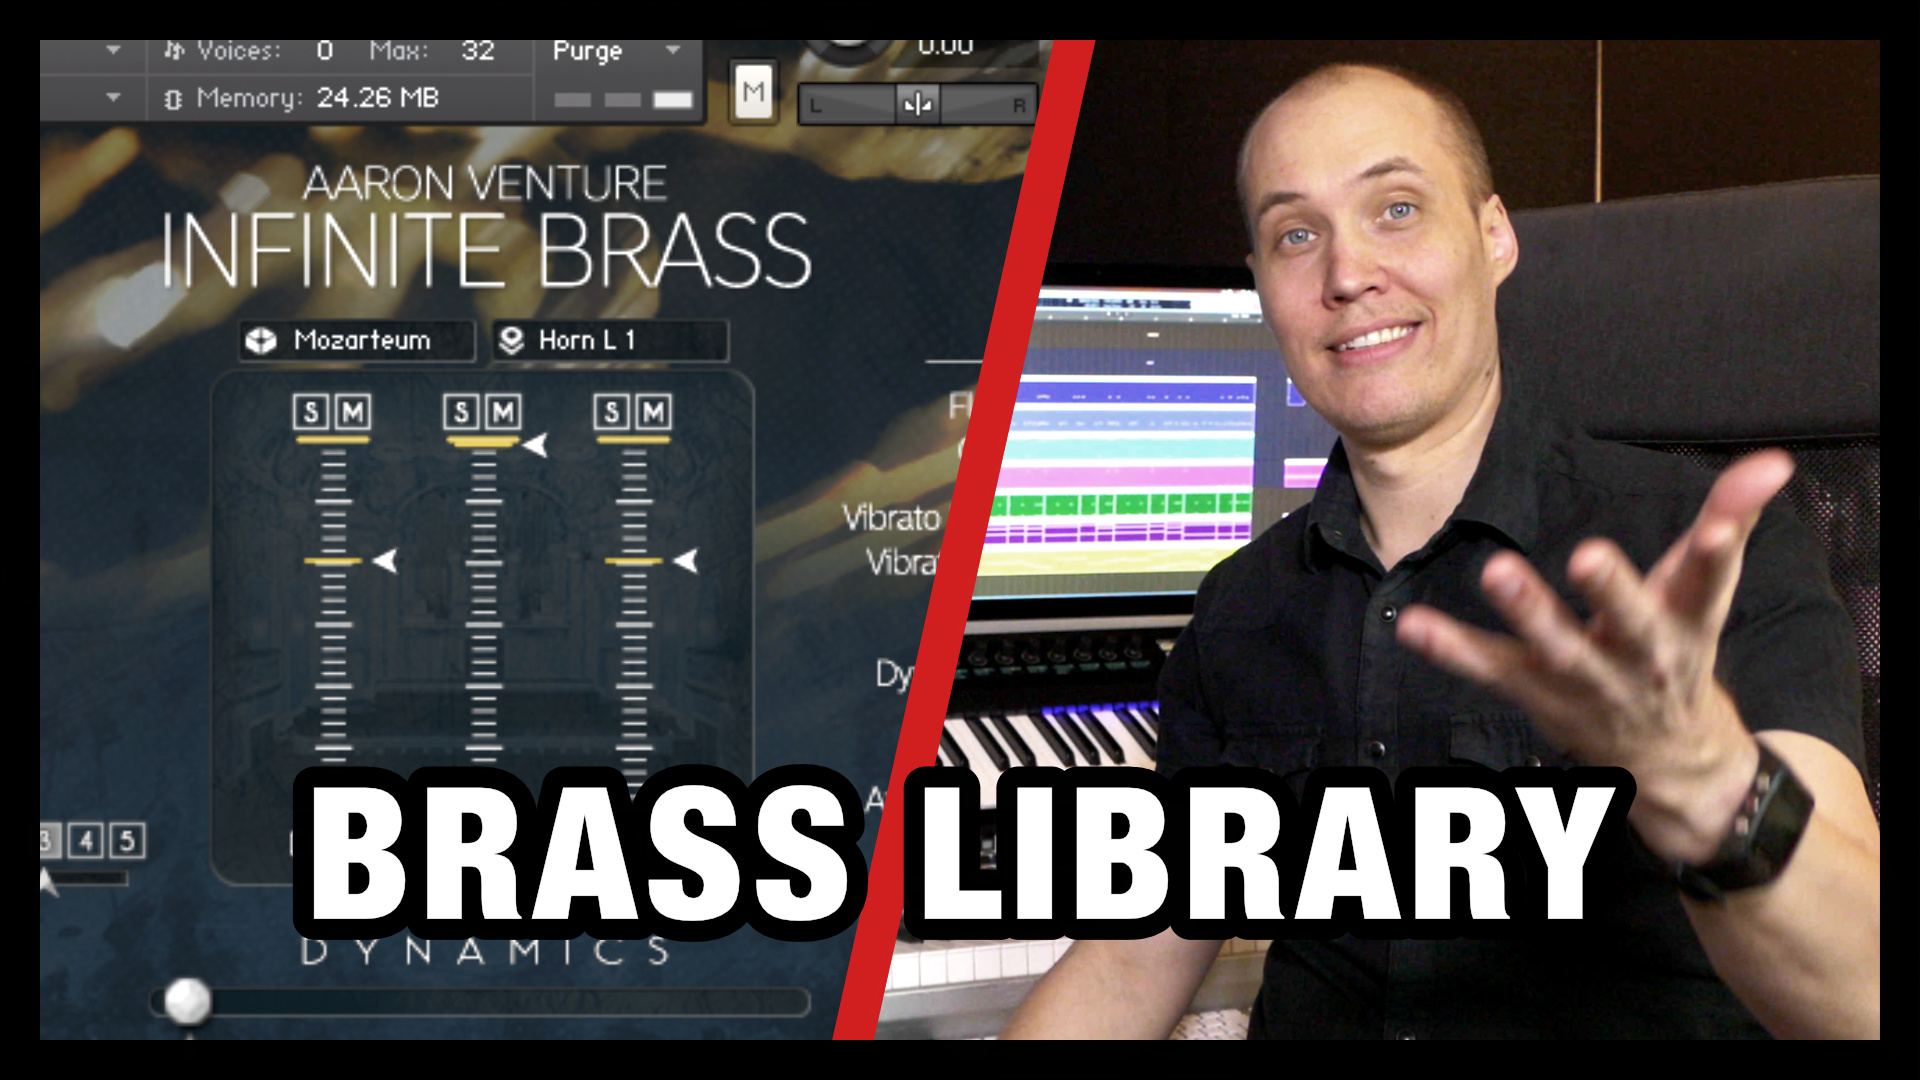 Let's Review - Infinite Brass